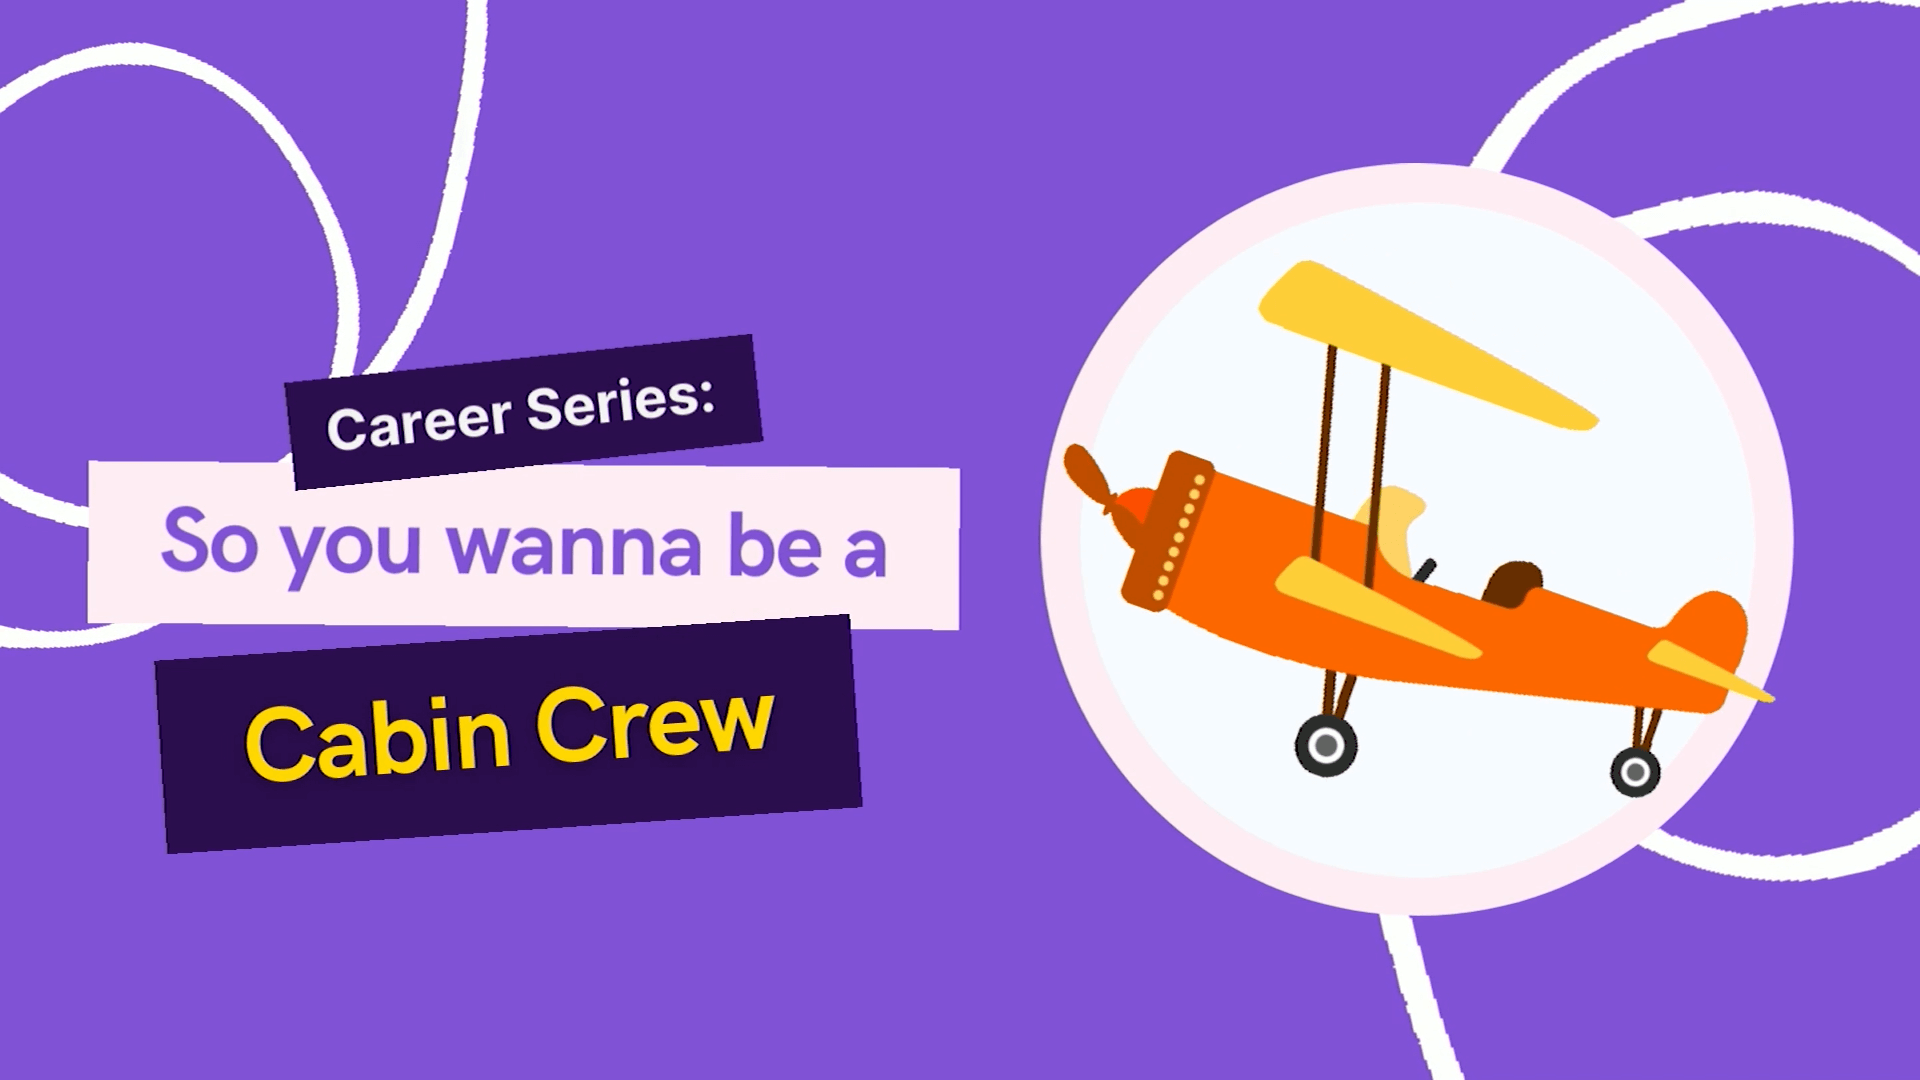 Career Series for Kids: So You Wanna Be a Cabin Crew